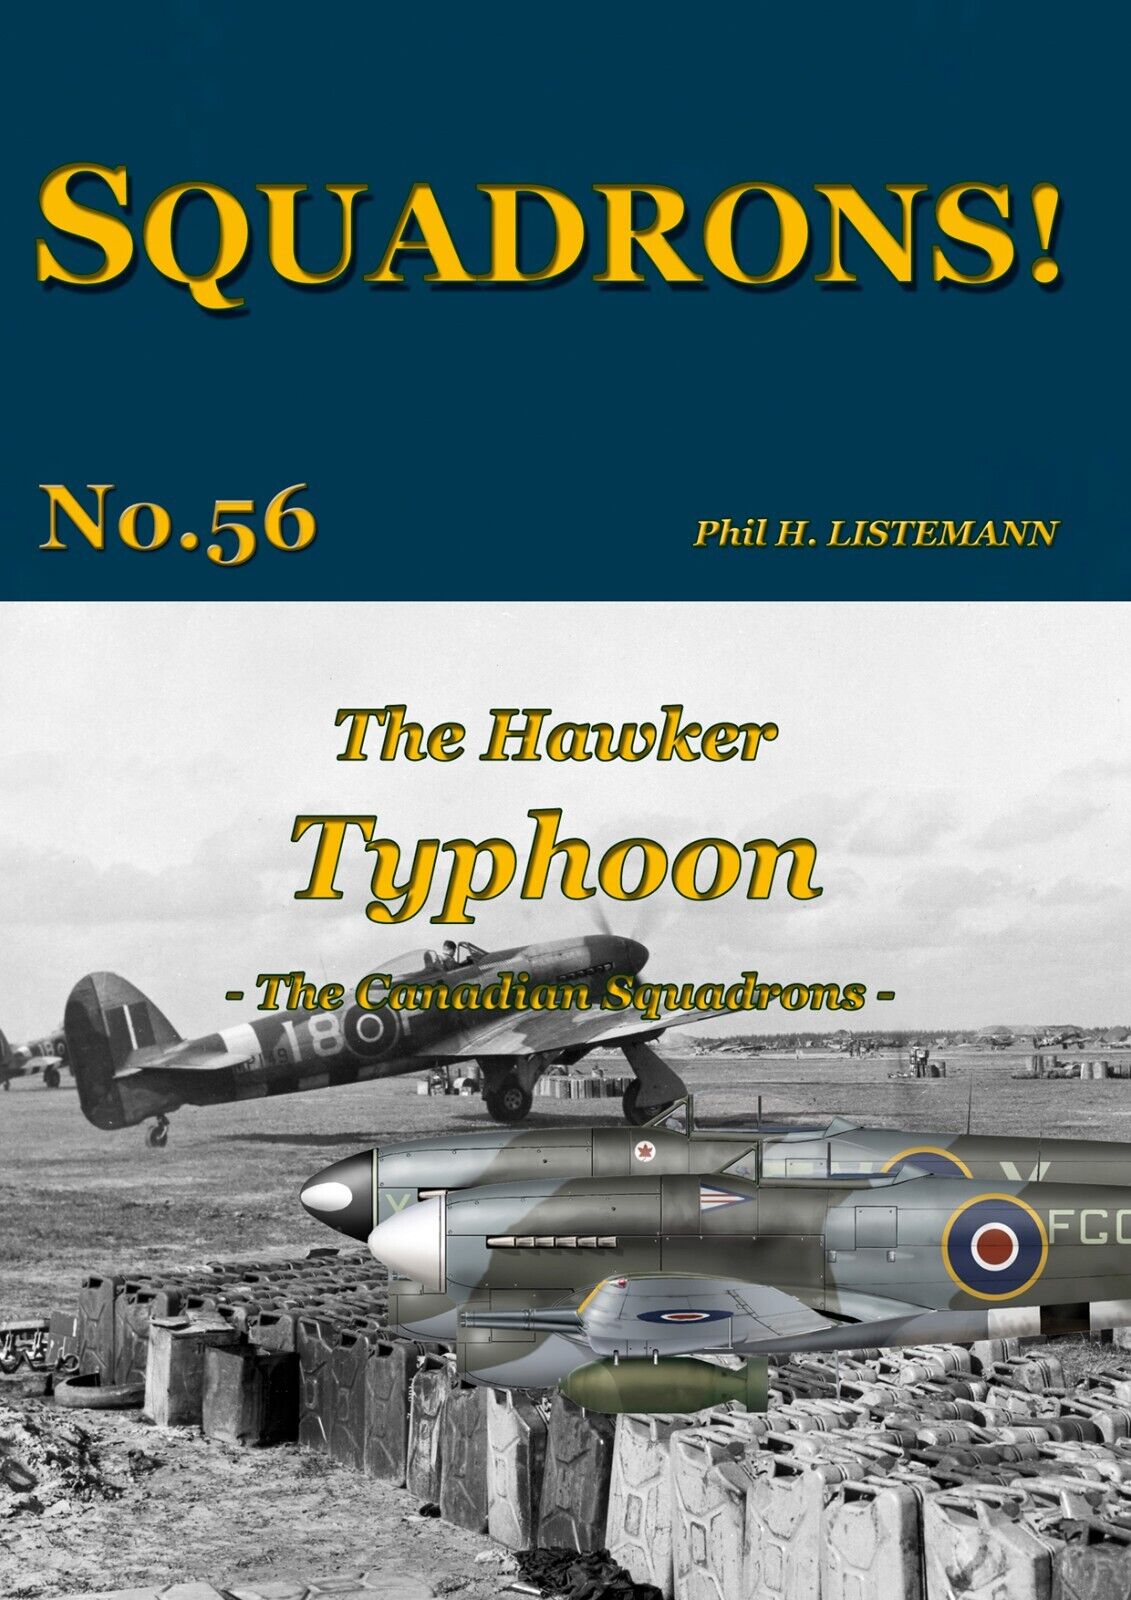 SQUADRONS No. 56 - The Hawker TYPHOON - The Canadian Squadrons (438, 439, 440)